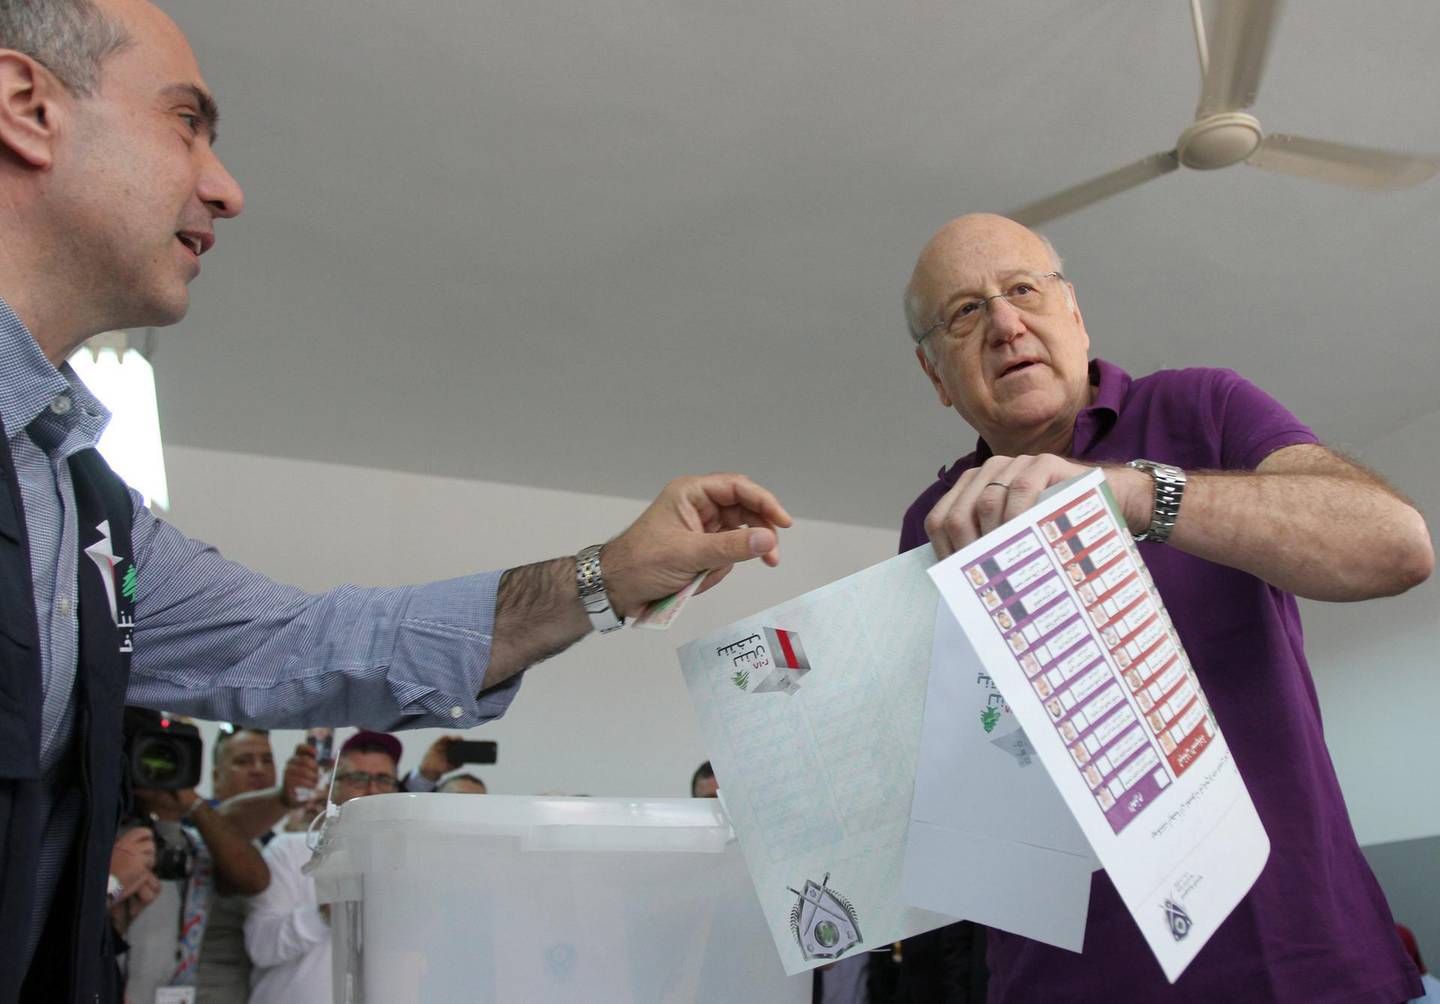 Lebanon's former Prime Minister and a candidate for the parliamentary election Najib Mikati, holds his ballot at a polling station in Tripoli, northern Lebanon, May 6, 2018. REUTERS/Omar Ibrahim